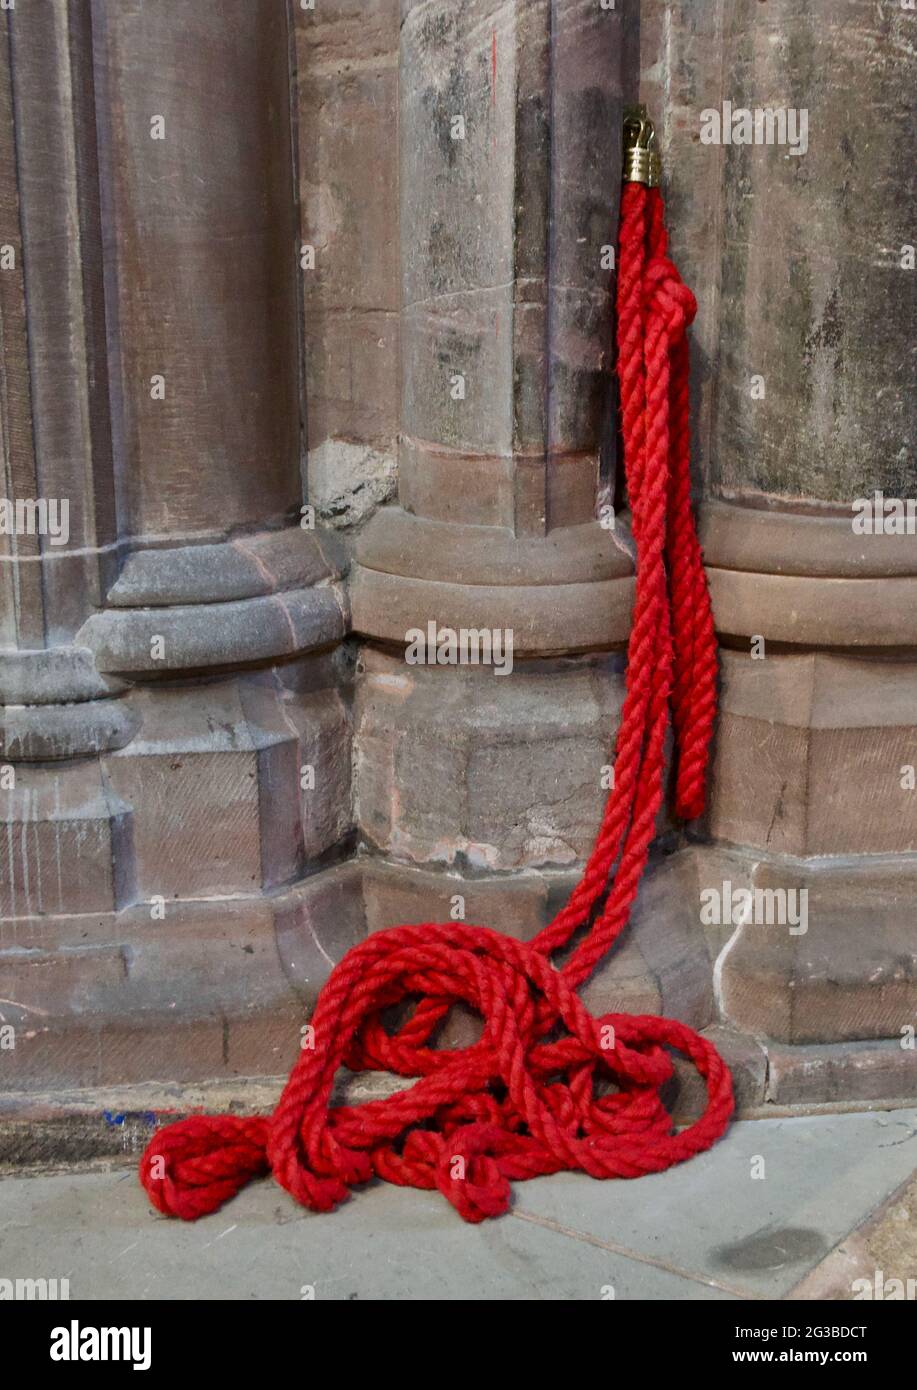 Red barrier rope with brass hook attached to wall in old building